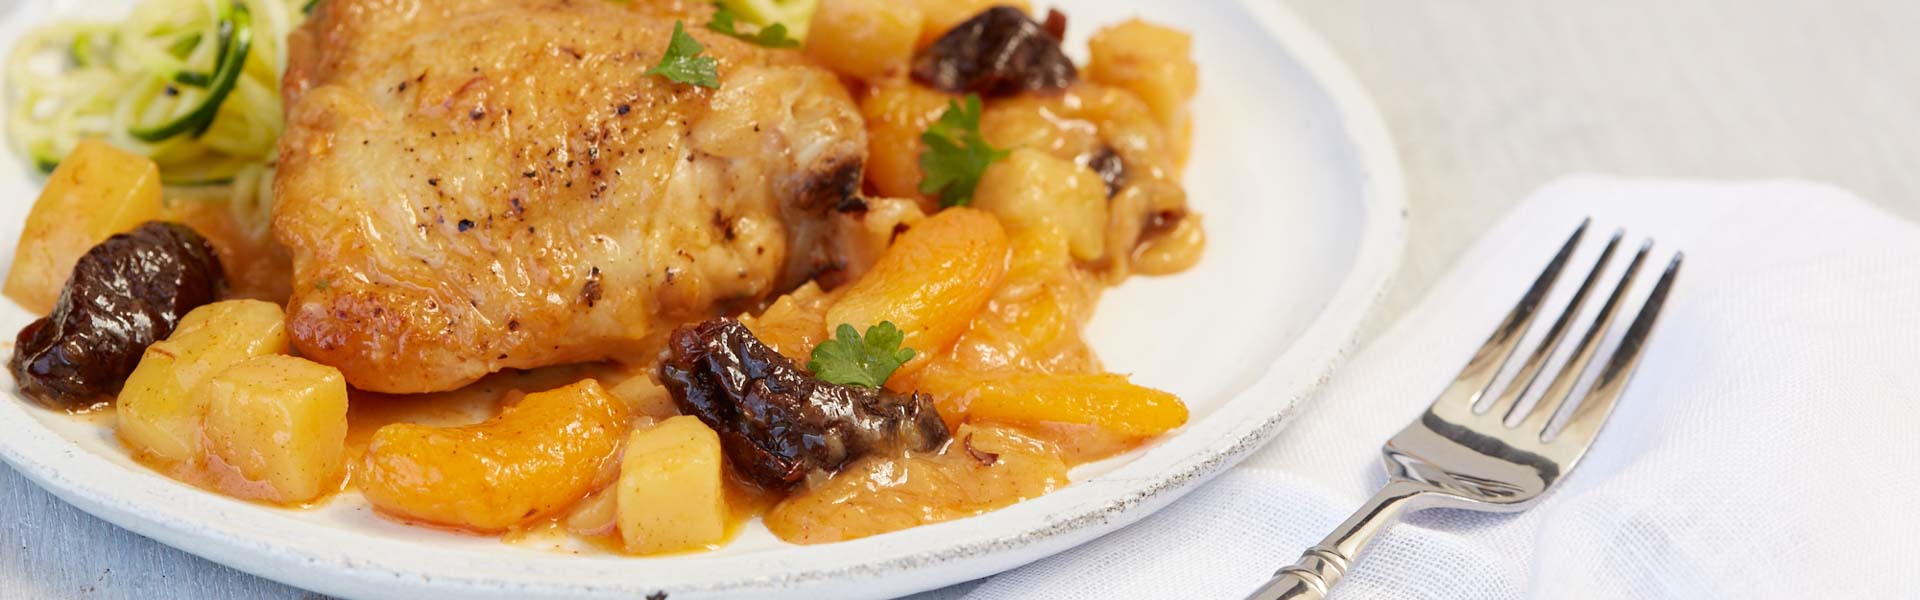 Braise chicken in a slow cooker with Sunsweet prunes and dried apricots for a sweet-savory dish everyone will love.